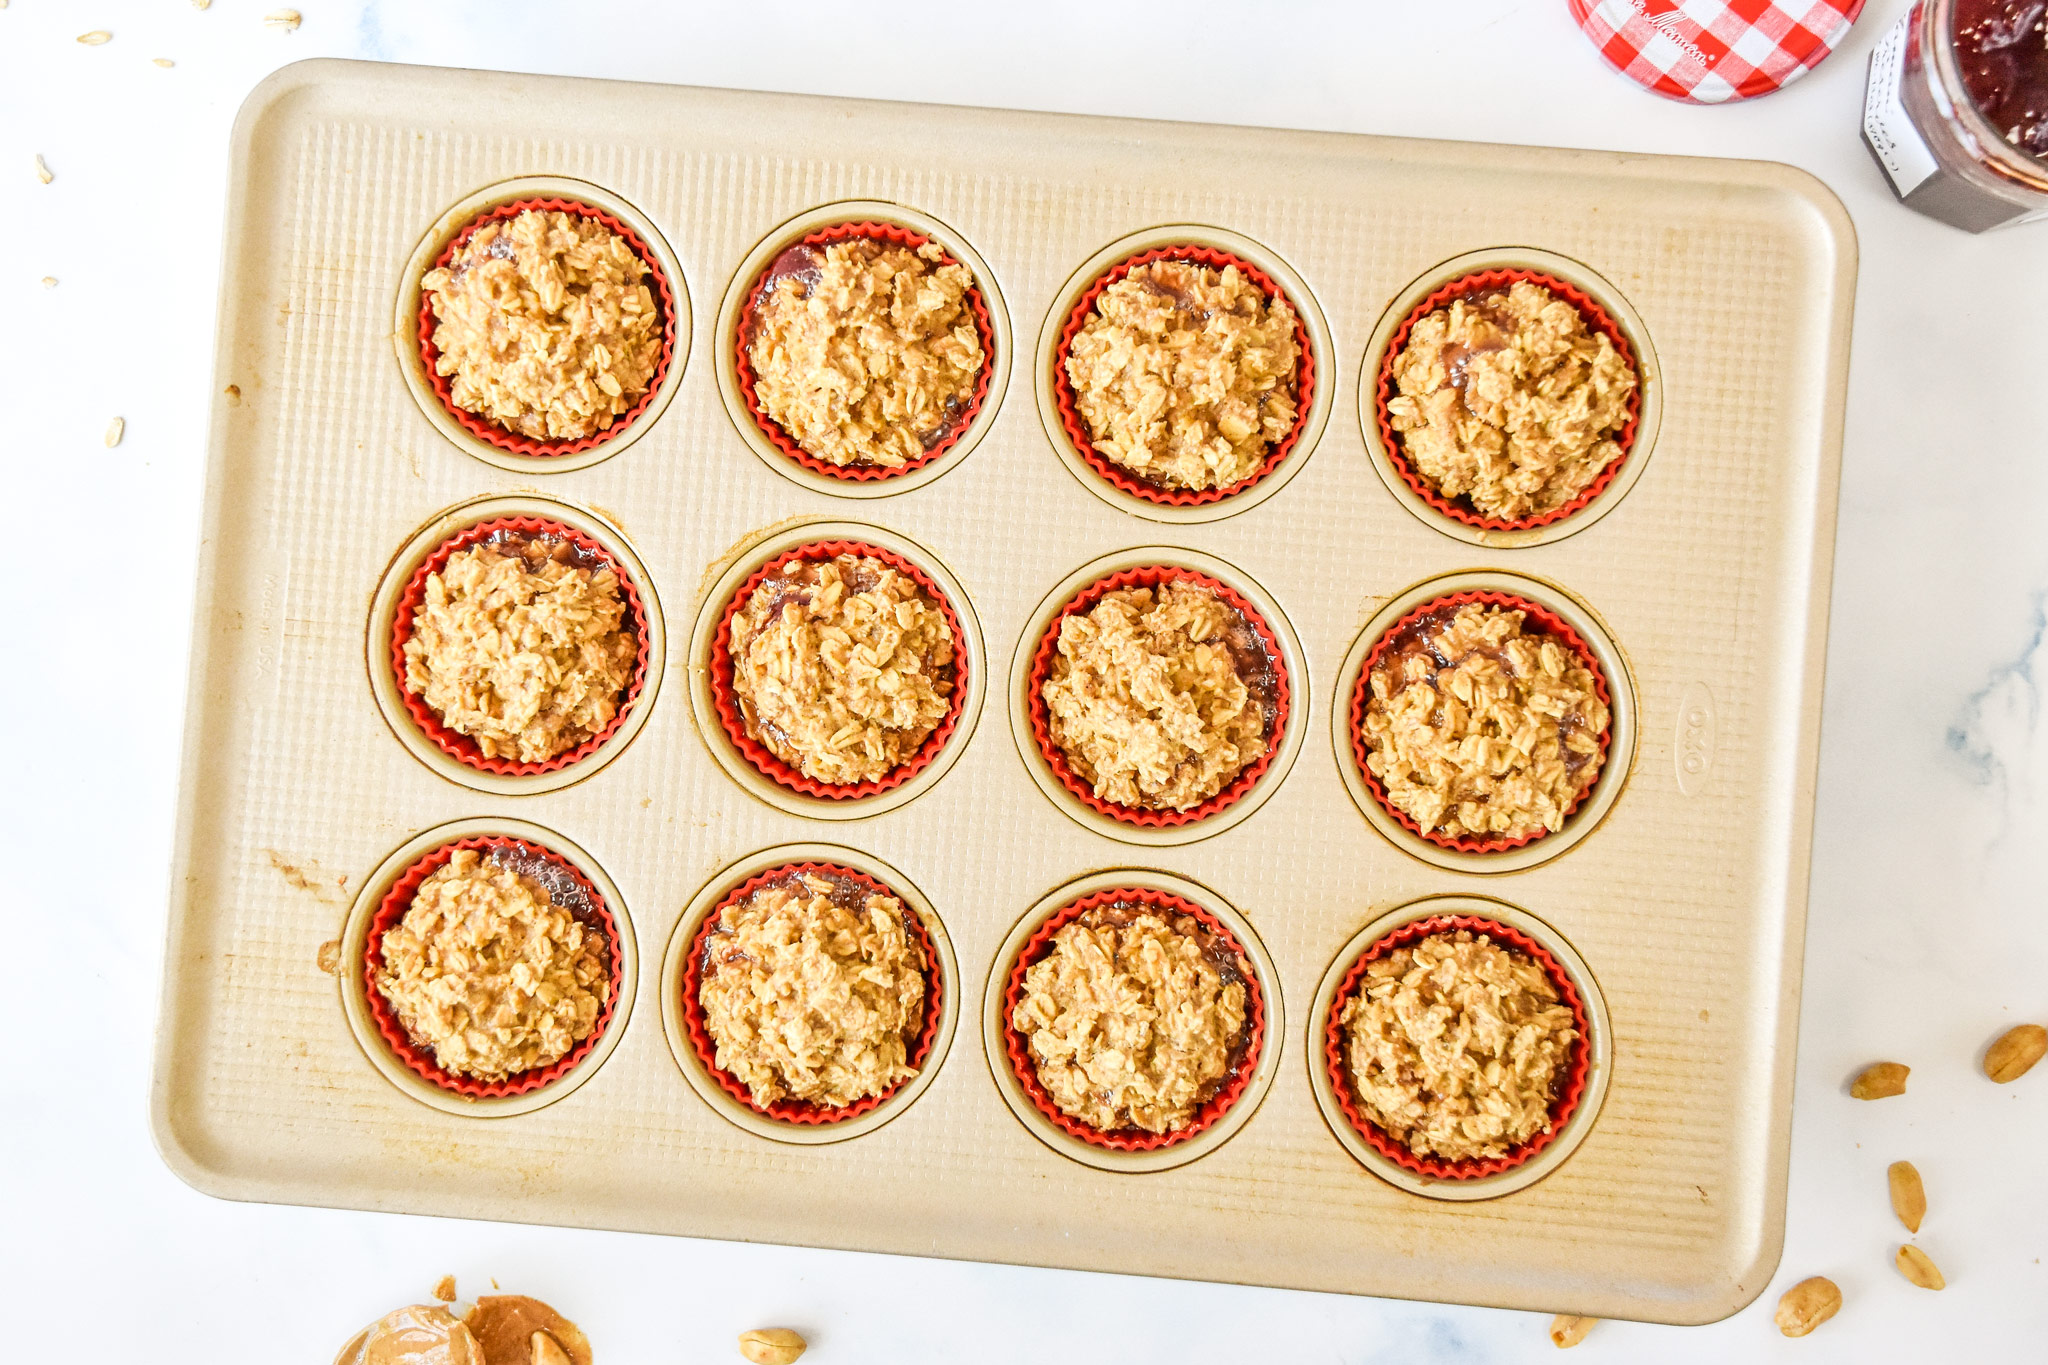 peanut butter & jelly baked oatmeal cups fresh from the oven.